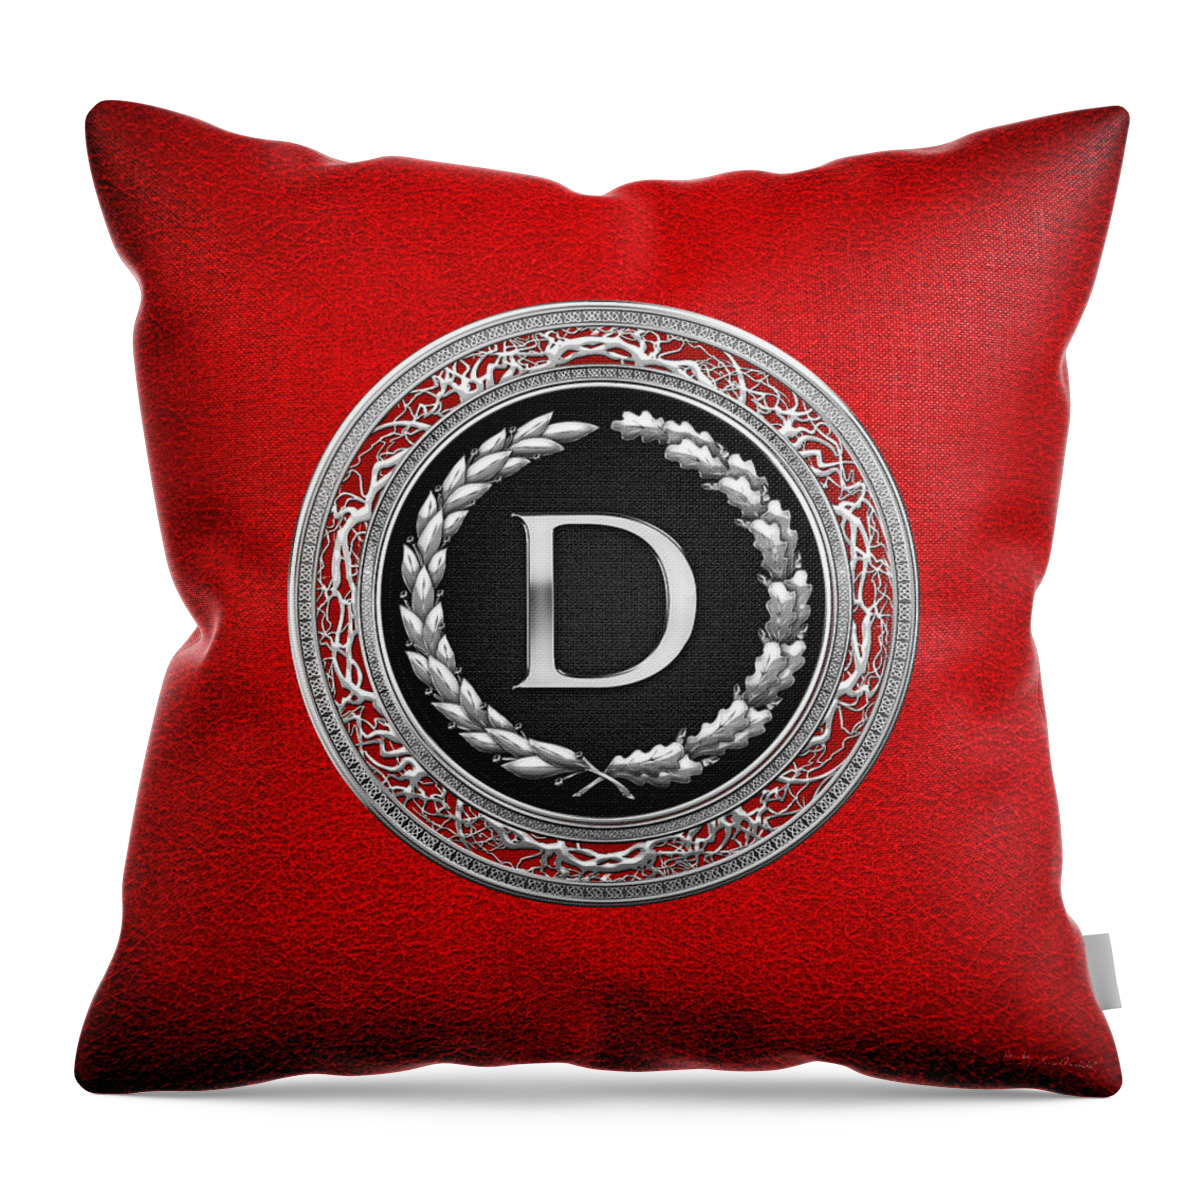 C7 Vintage Monograms 3d Throw Pillow featuring the digital art D - Silver Vintage Monogram on Red Leather by Serge Averbukh